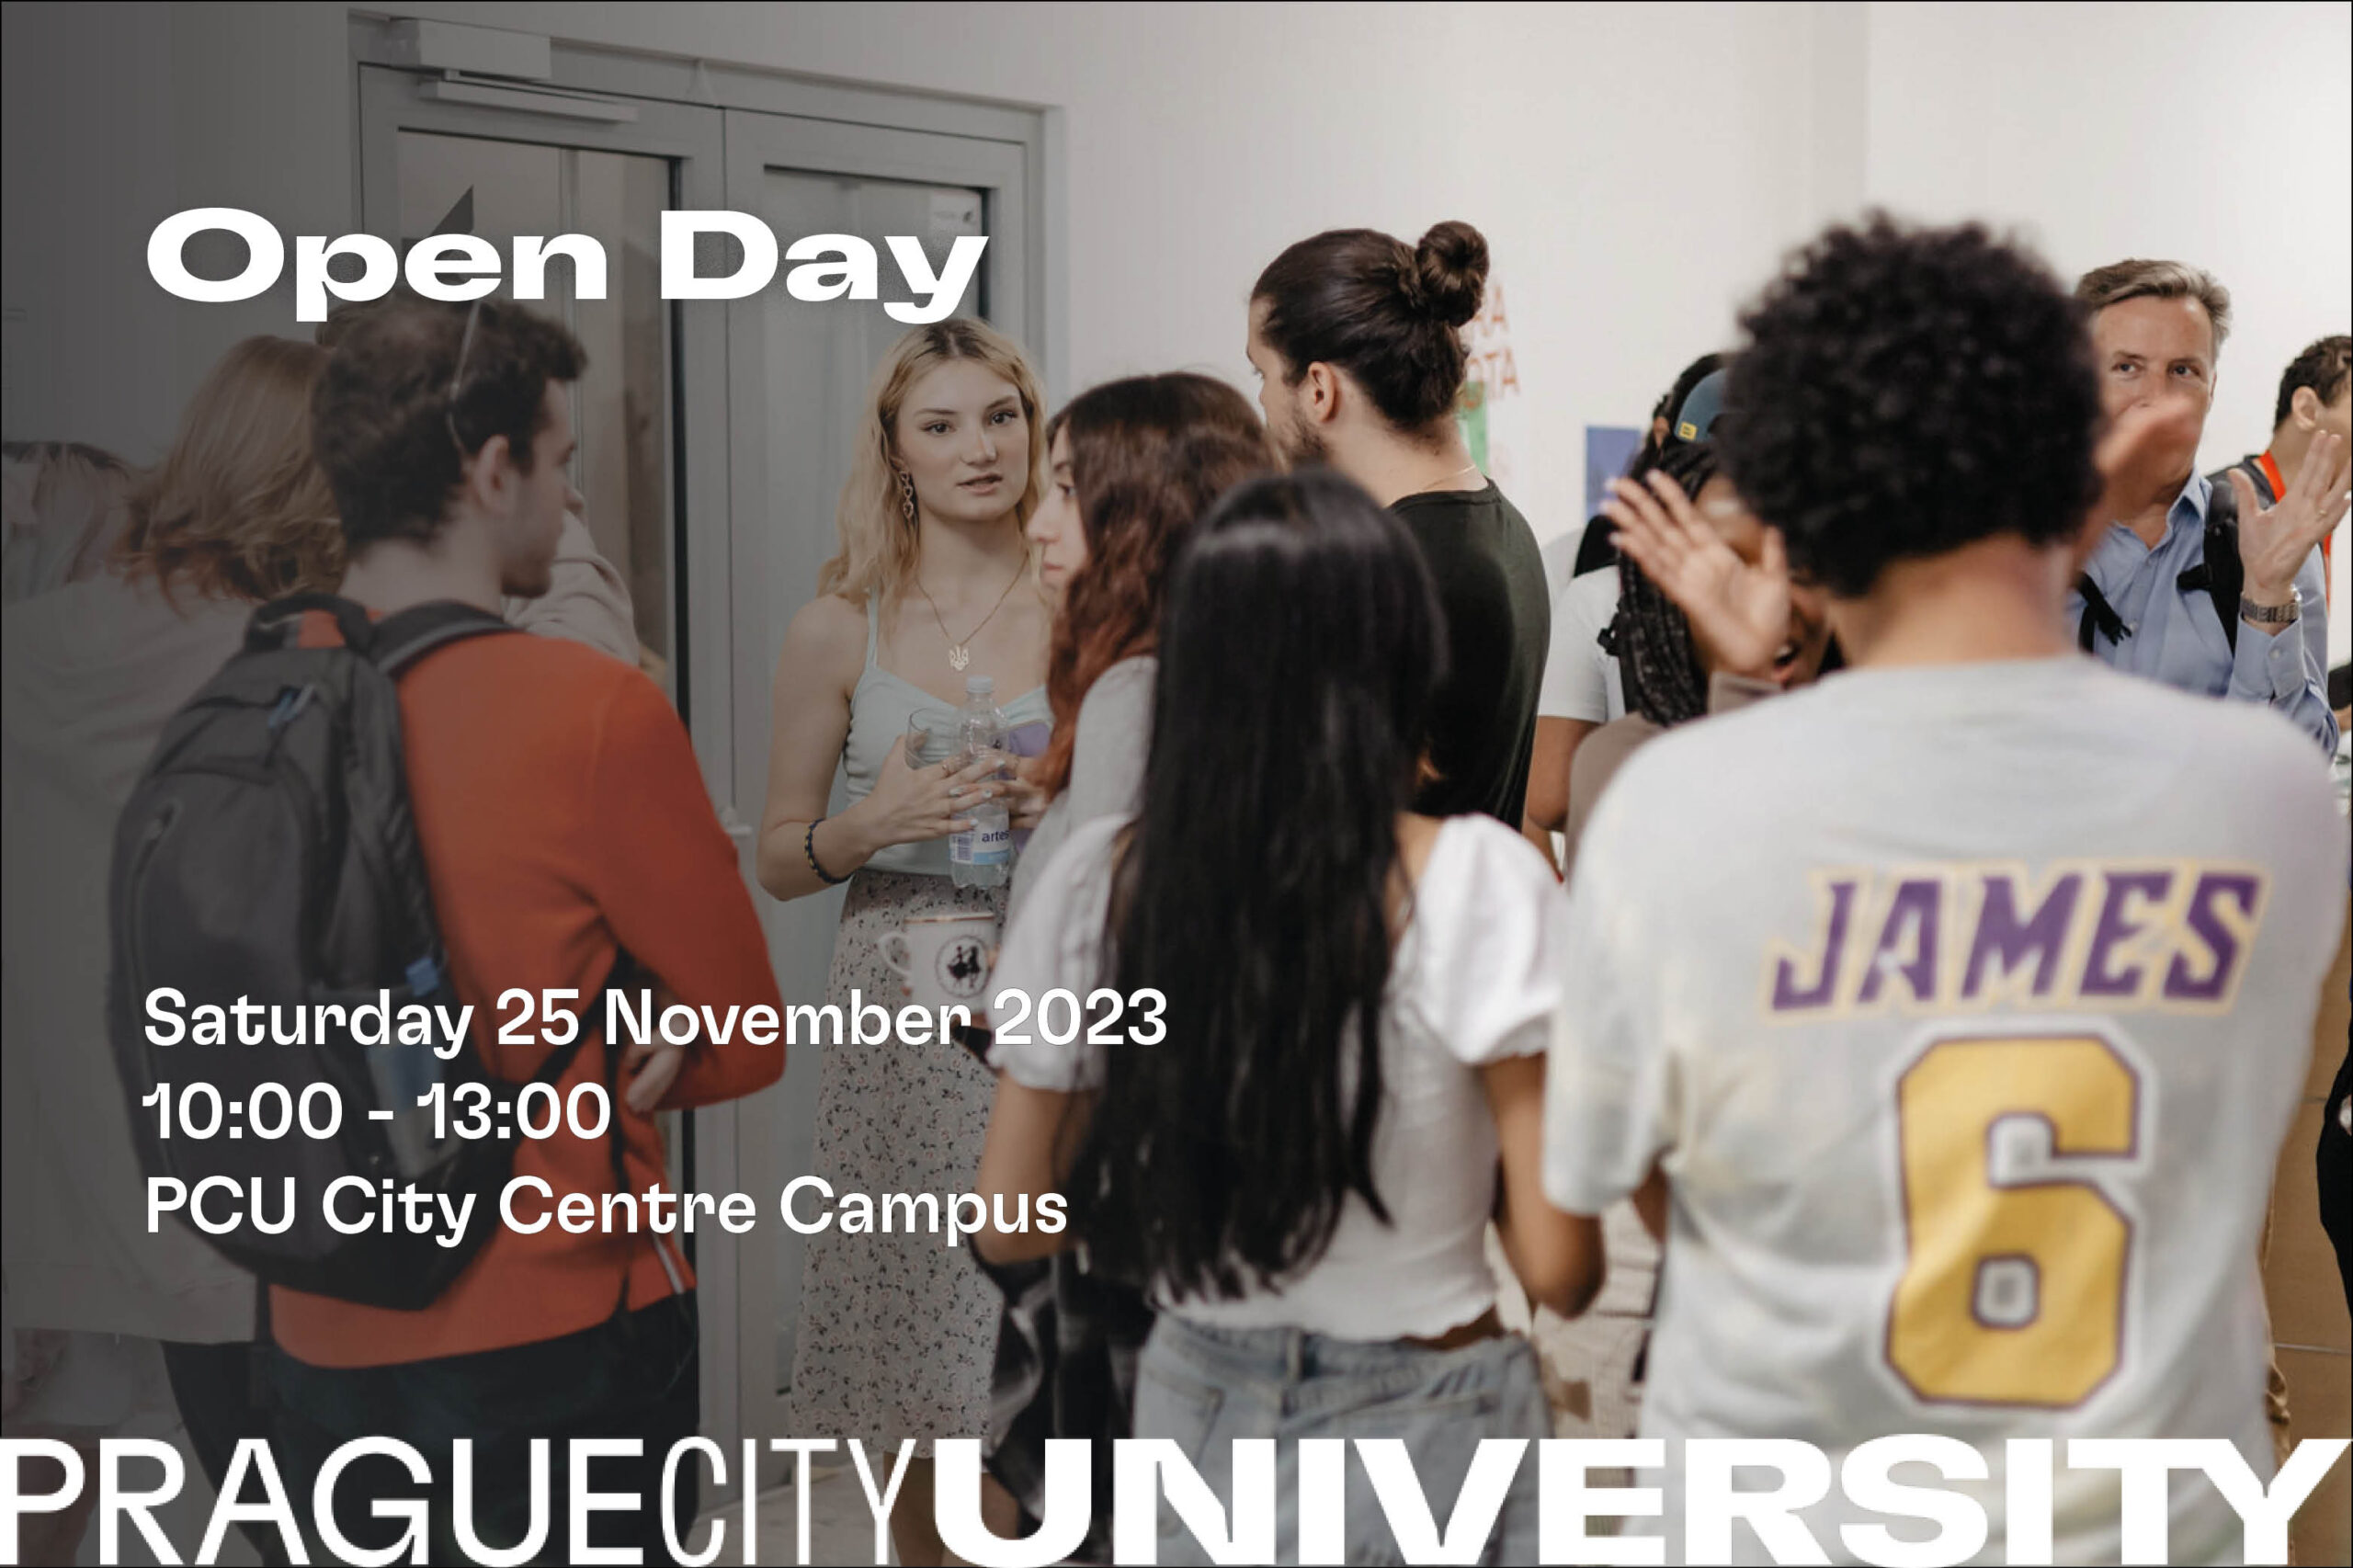 Open Day at PCU CIty Center Campus, Saturday 25 November 2023, 10:00 - 13:00